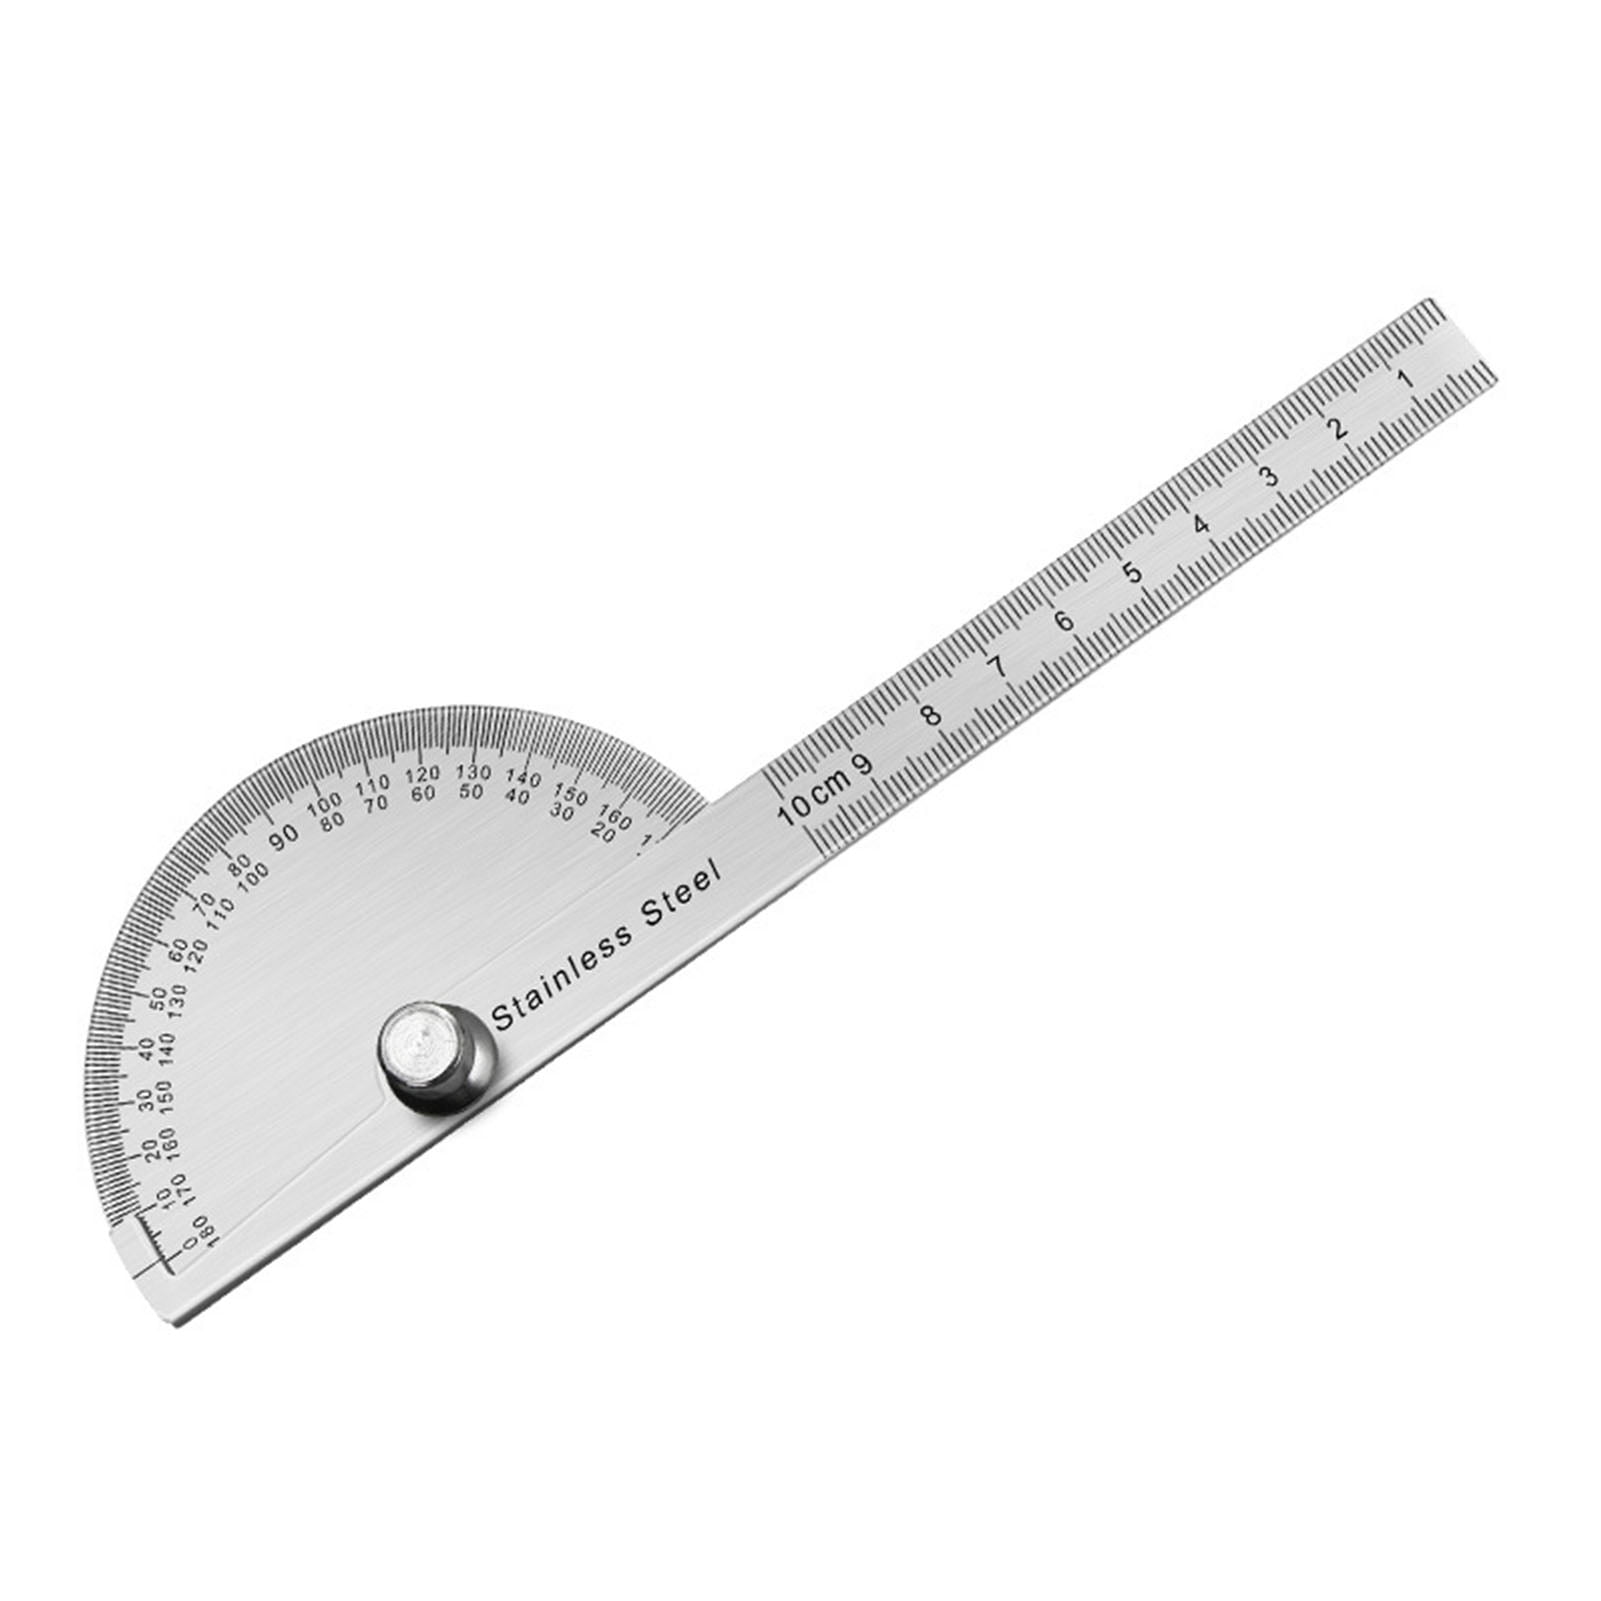 Digital Display Magnetic Base Protractor Goniometer for Measure Woodworking 1pc 